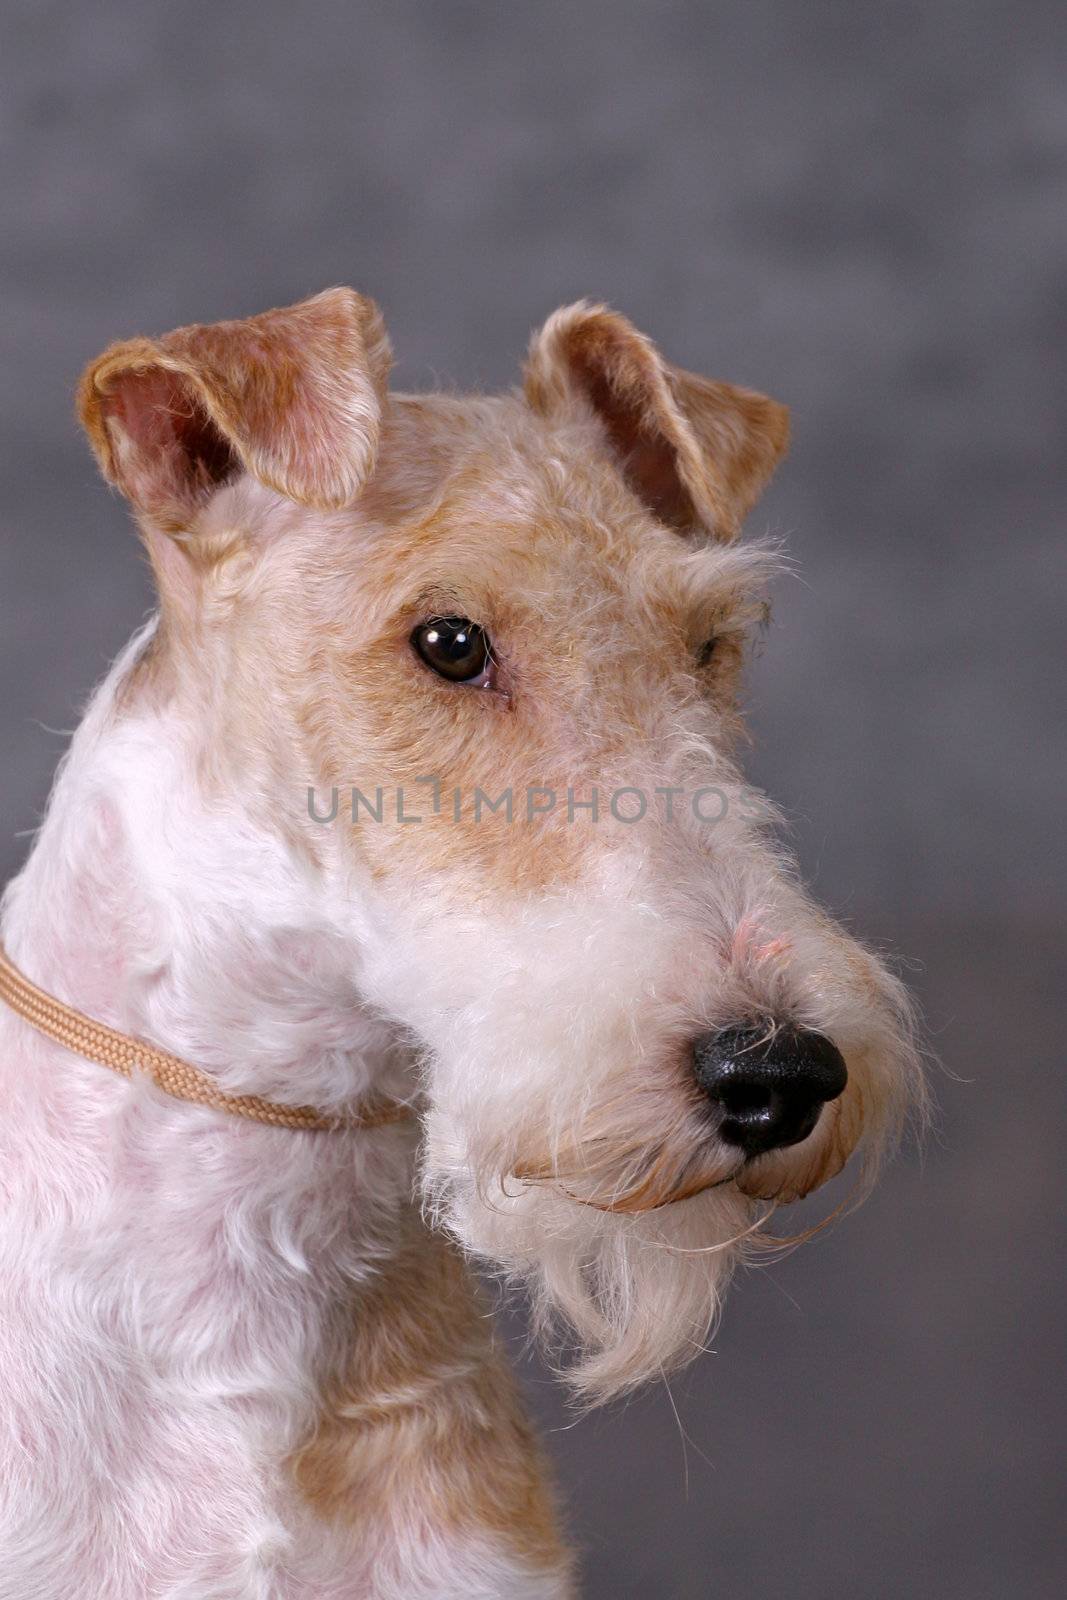 Wired fox terrier dog portrate on a grey background